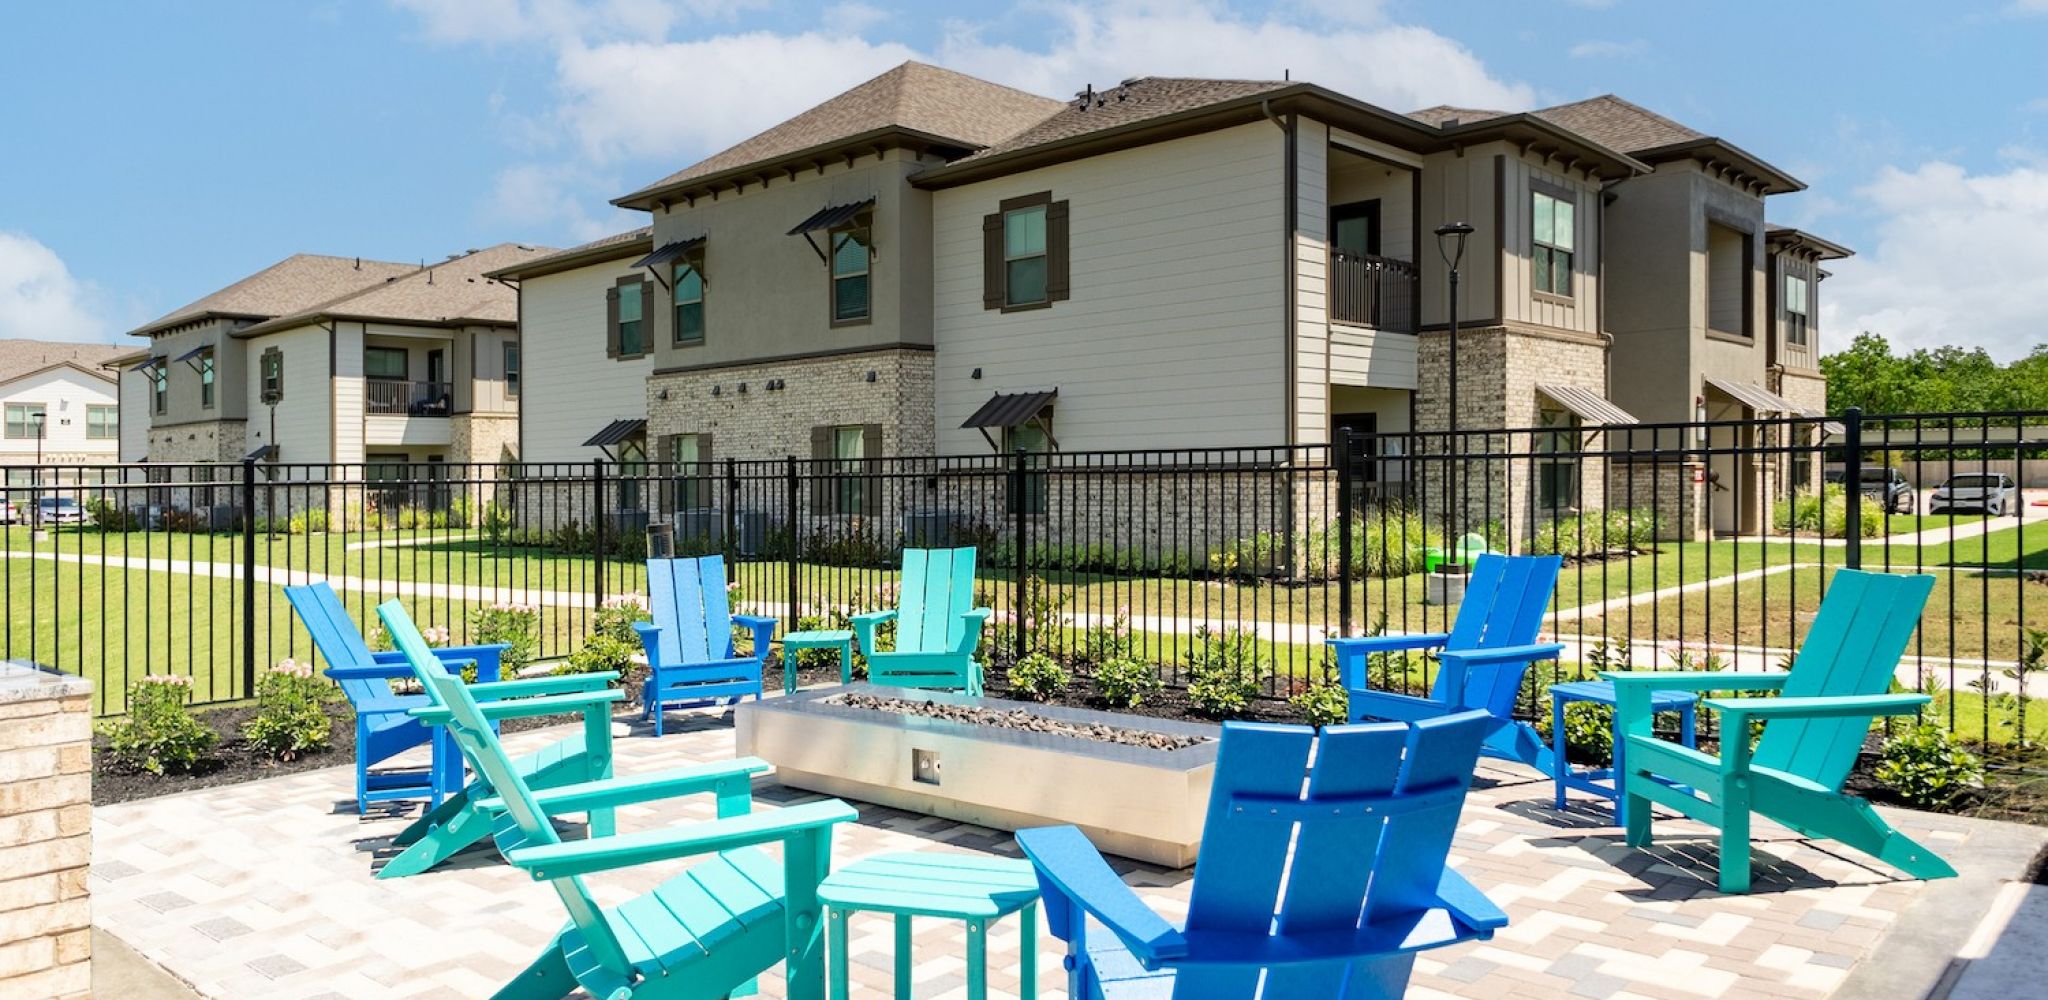 Hawthorne at Bay Forest apartments community exterior with outdoor fire pit and seating